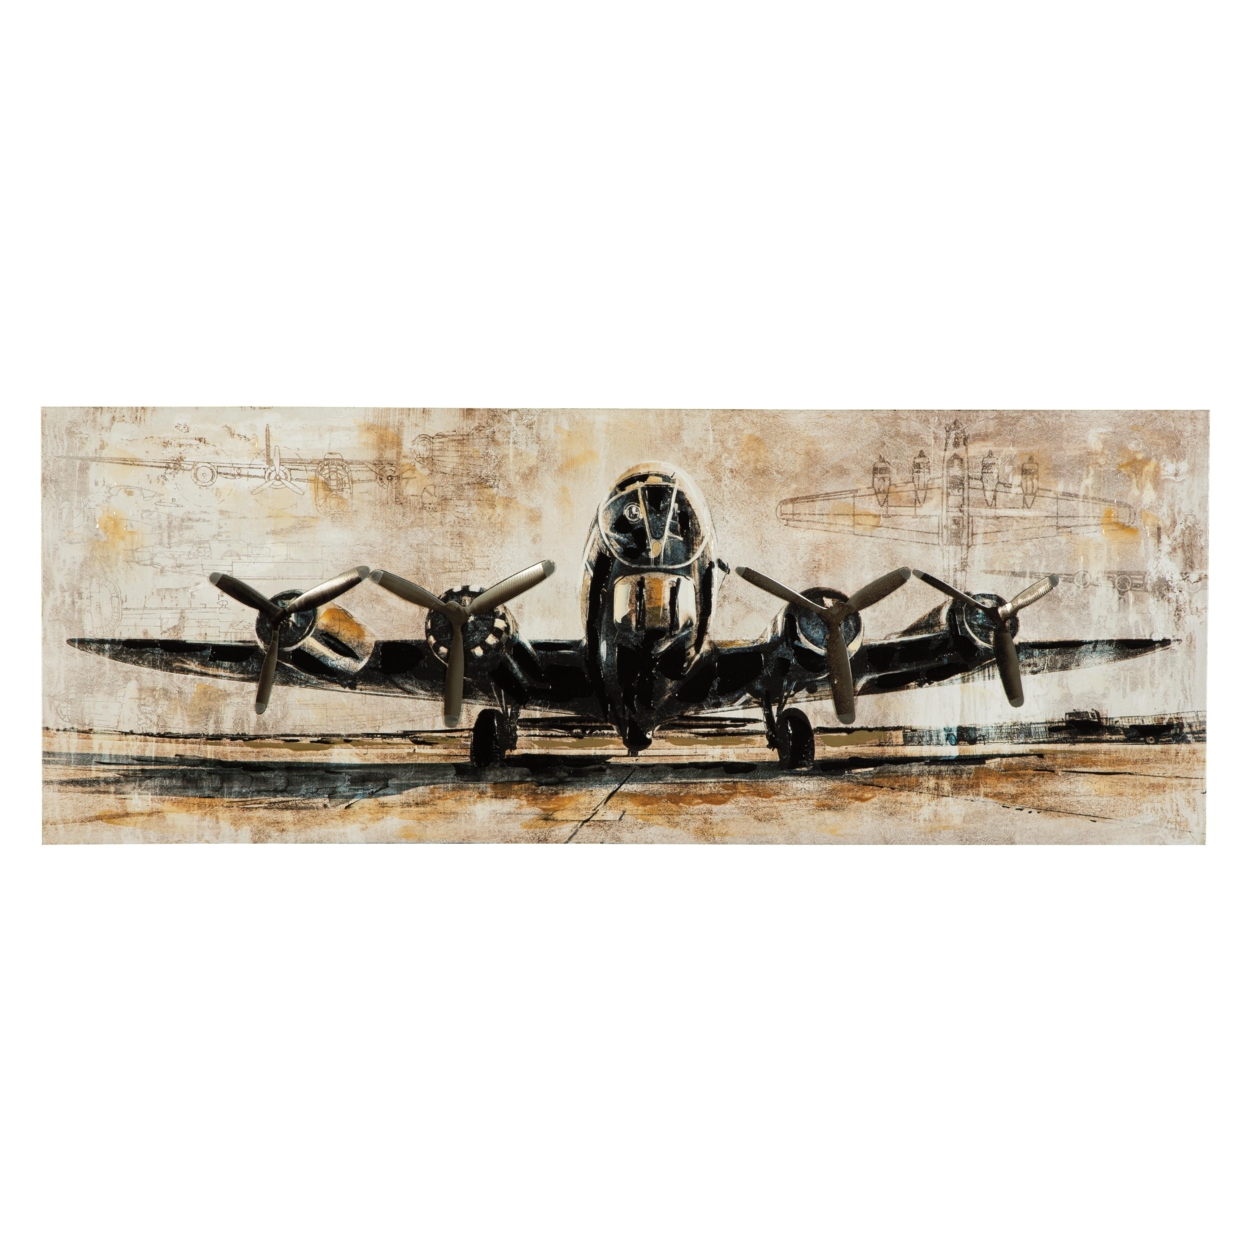 Gallery Wrapped Canvas Wall Art With Airplane Print, Brown And Black- Saltoro Sherpi